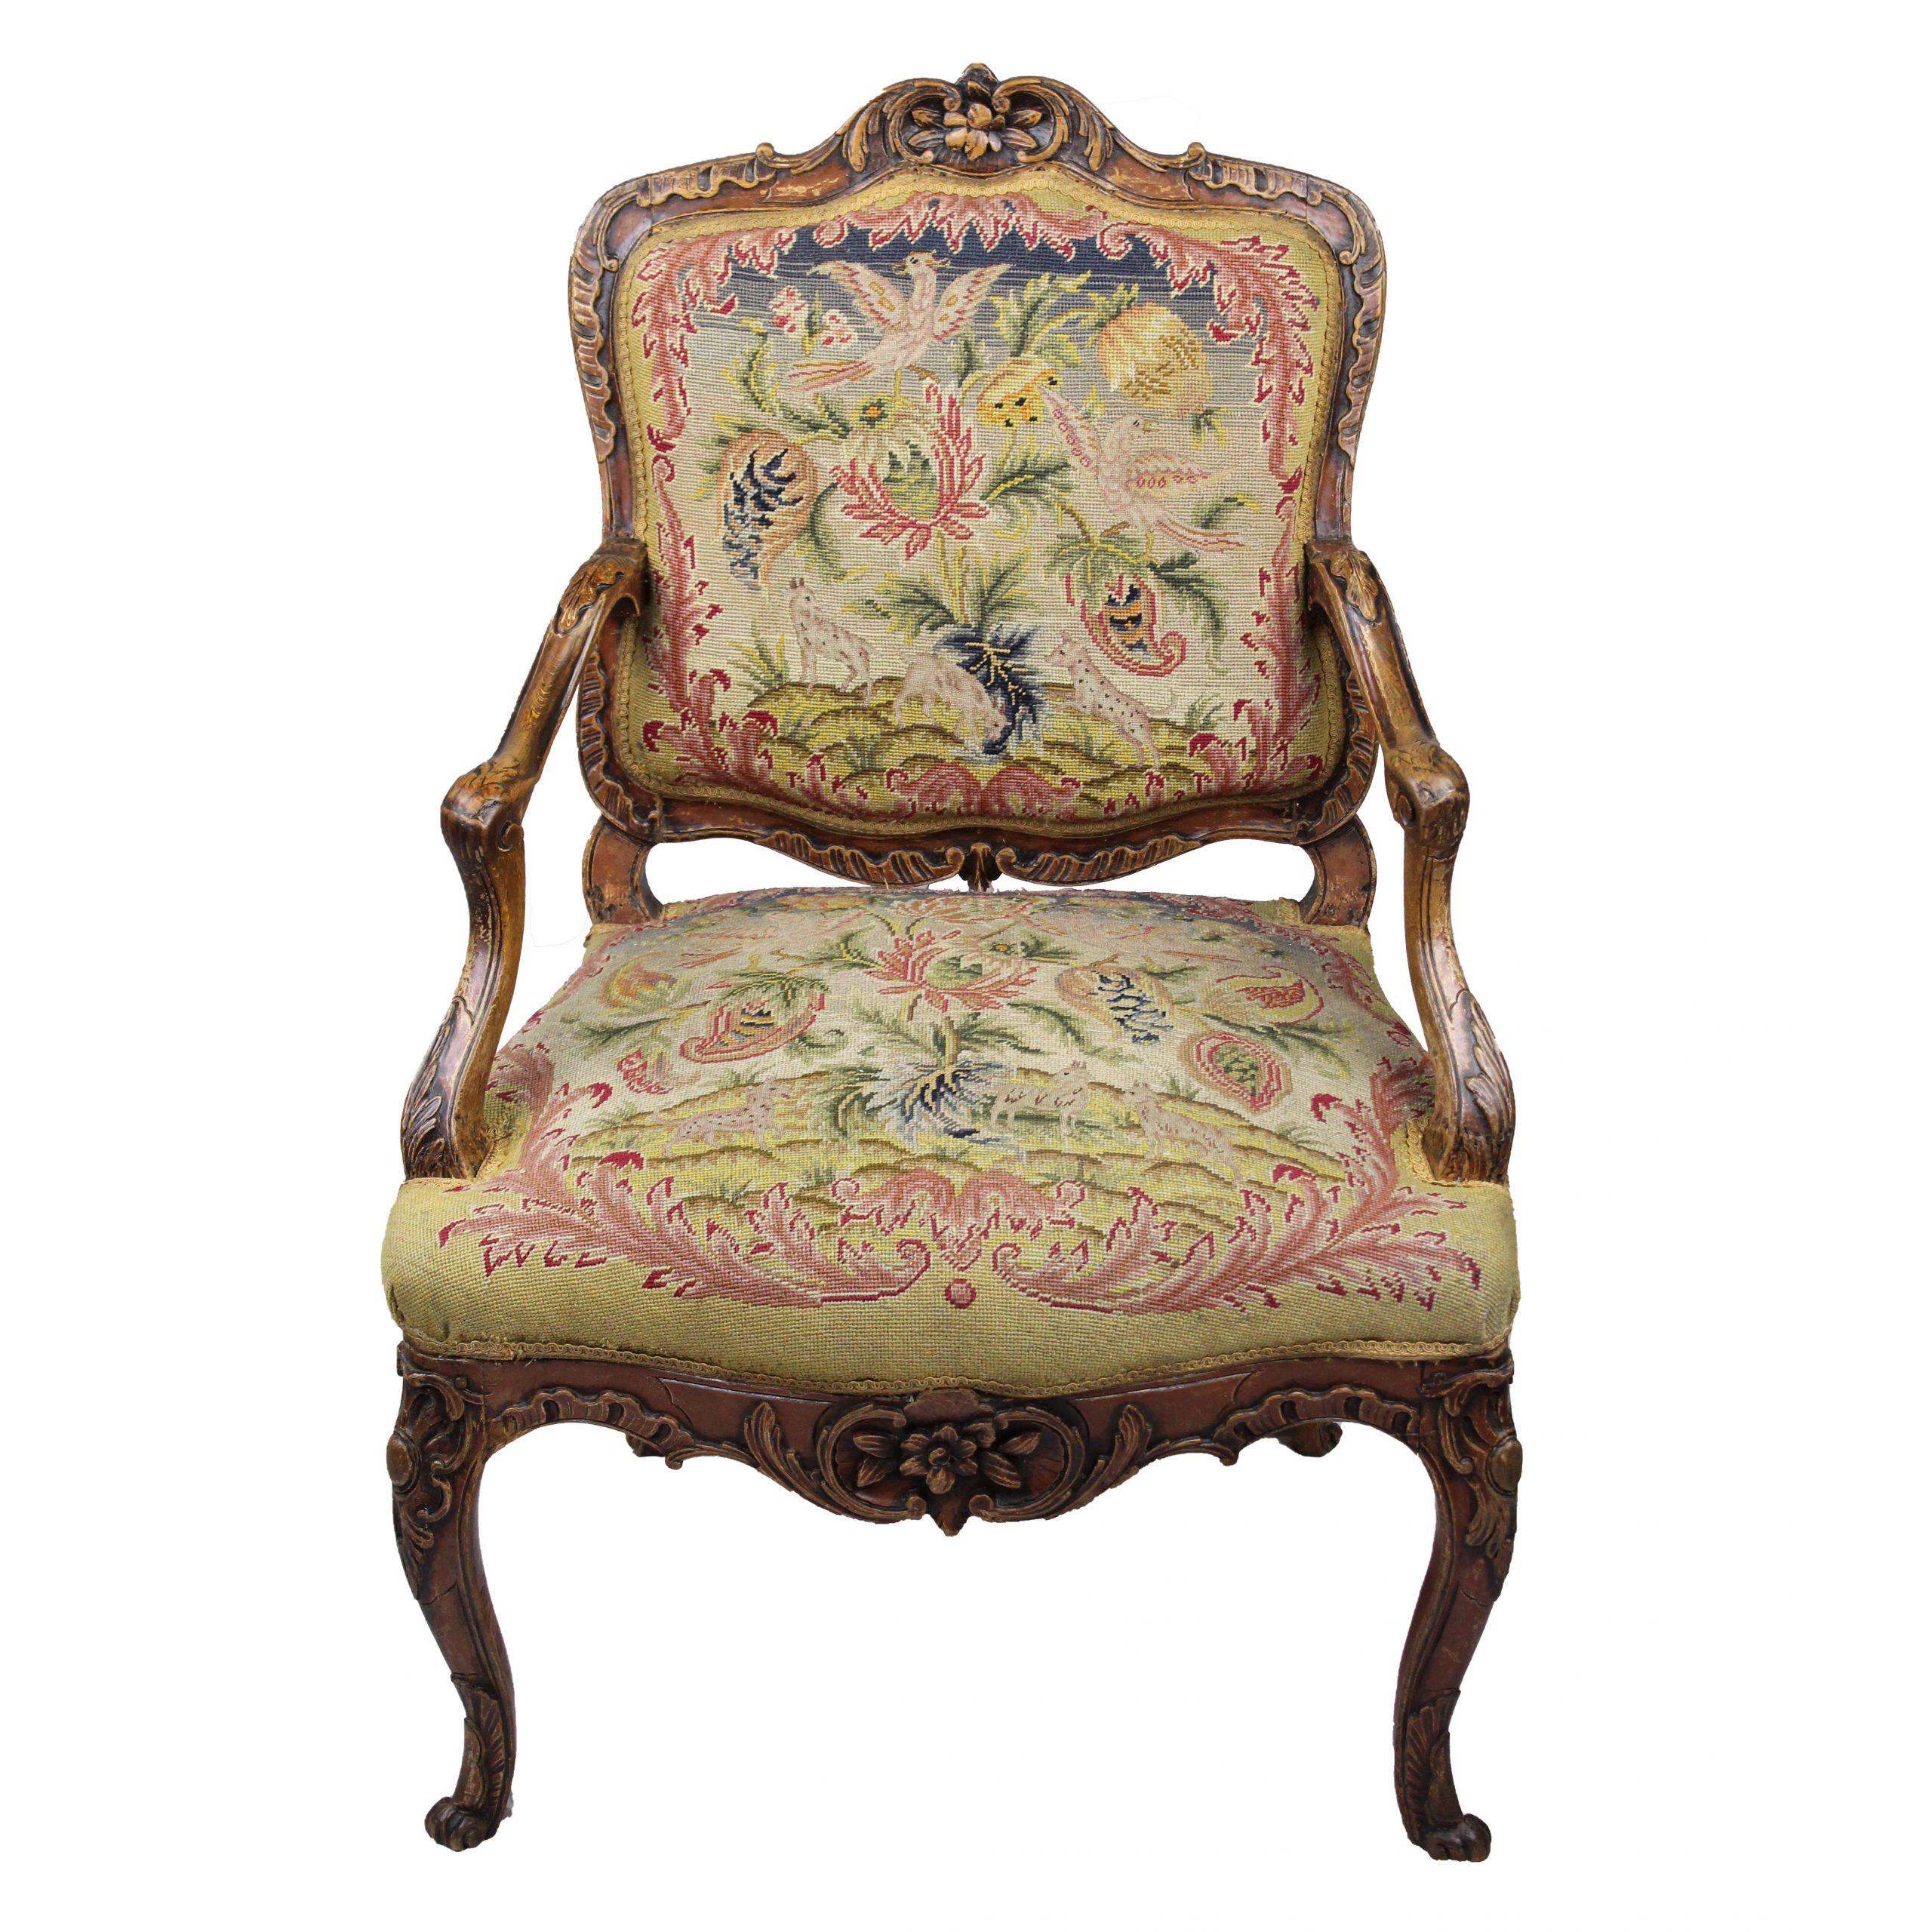 Armchair, so called Fauteuil à la Reine, rococo around 1750, walnut carved, foliage and rocaille motifs, cover with petit point embroidery, this from the 1st half of the 19th century, beautiful original patina,

height: 91,5 cm, width: 63 cm, depth: